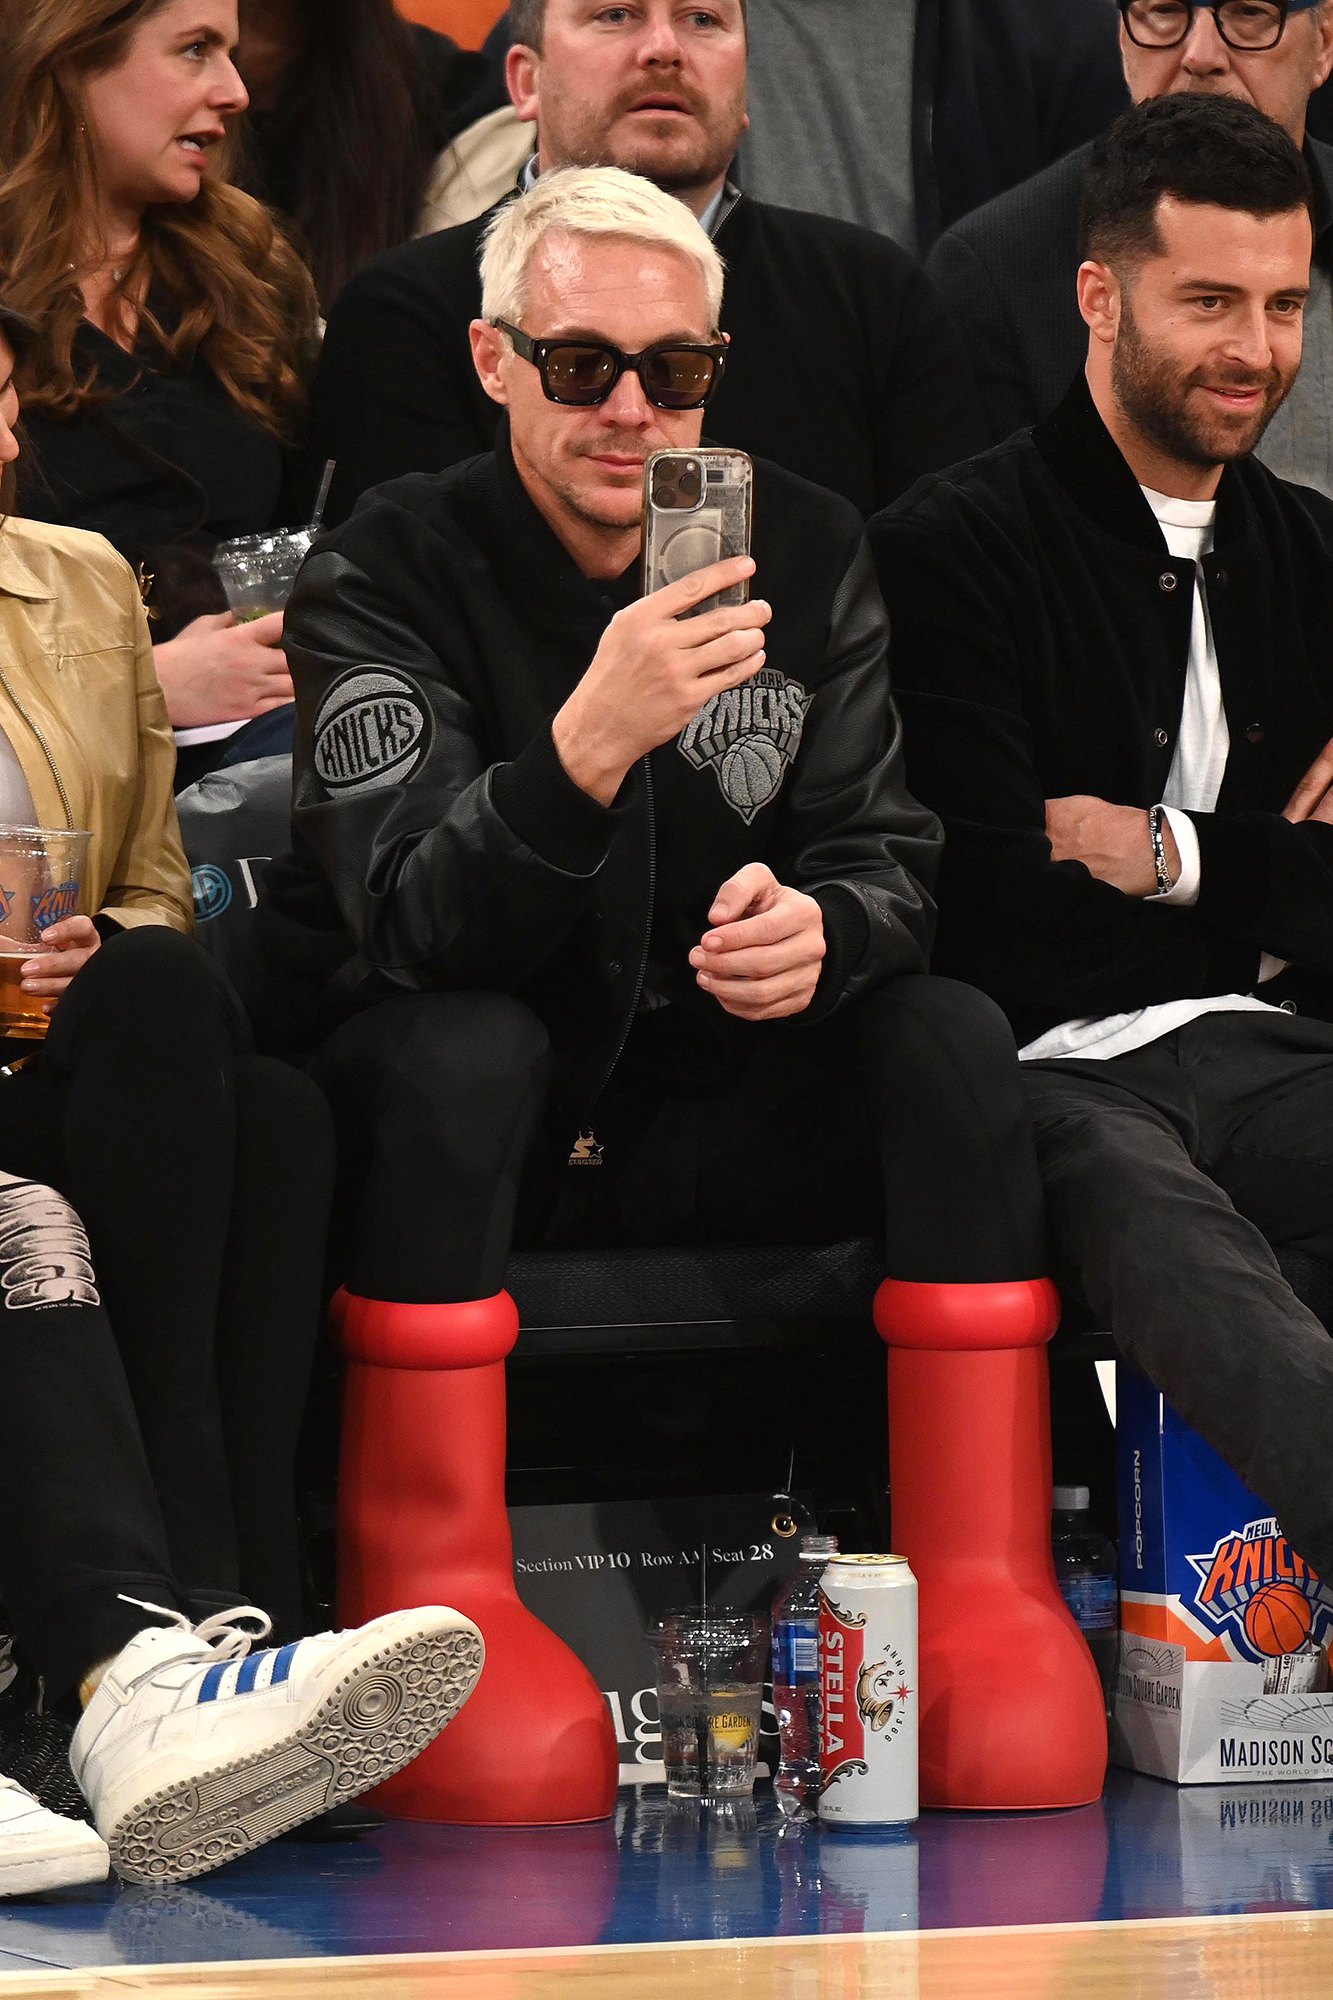 https://www.usmagazine.com/wp-content/uploads/2023/02/Diplo-Wears-Viral-Red-Boots-01.jpg?quality=86&strip=all